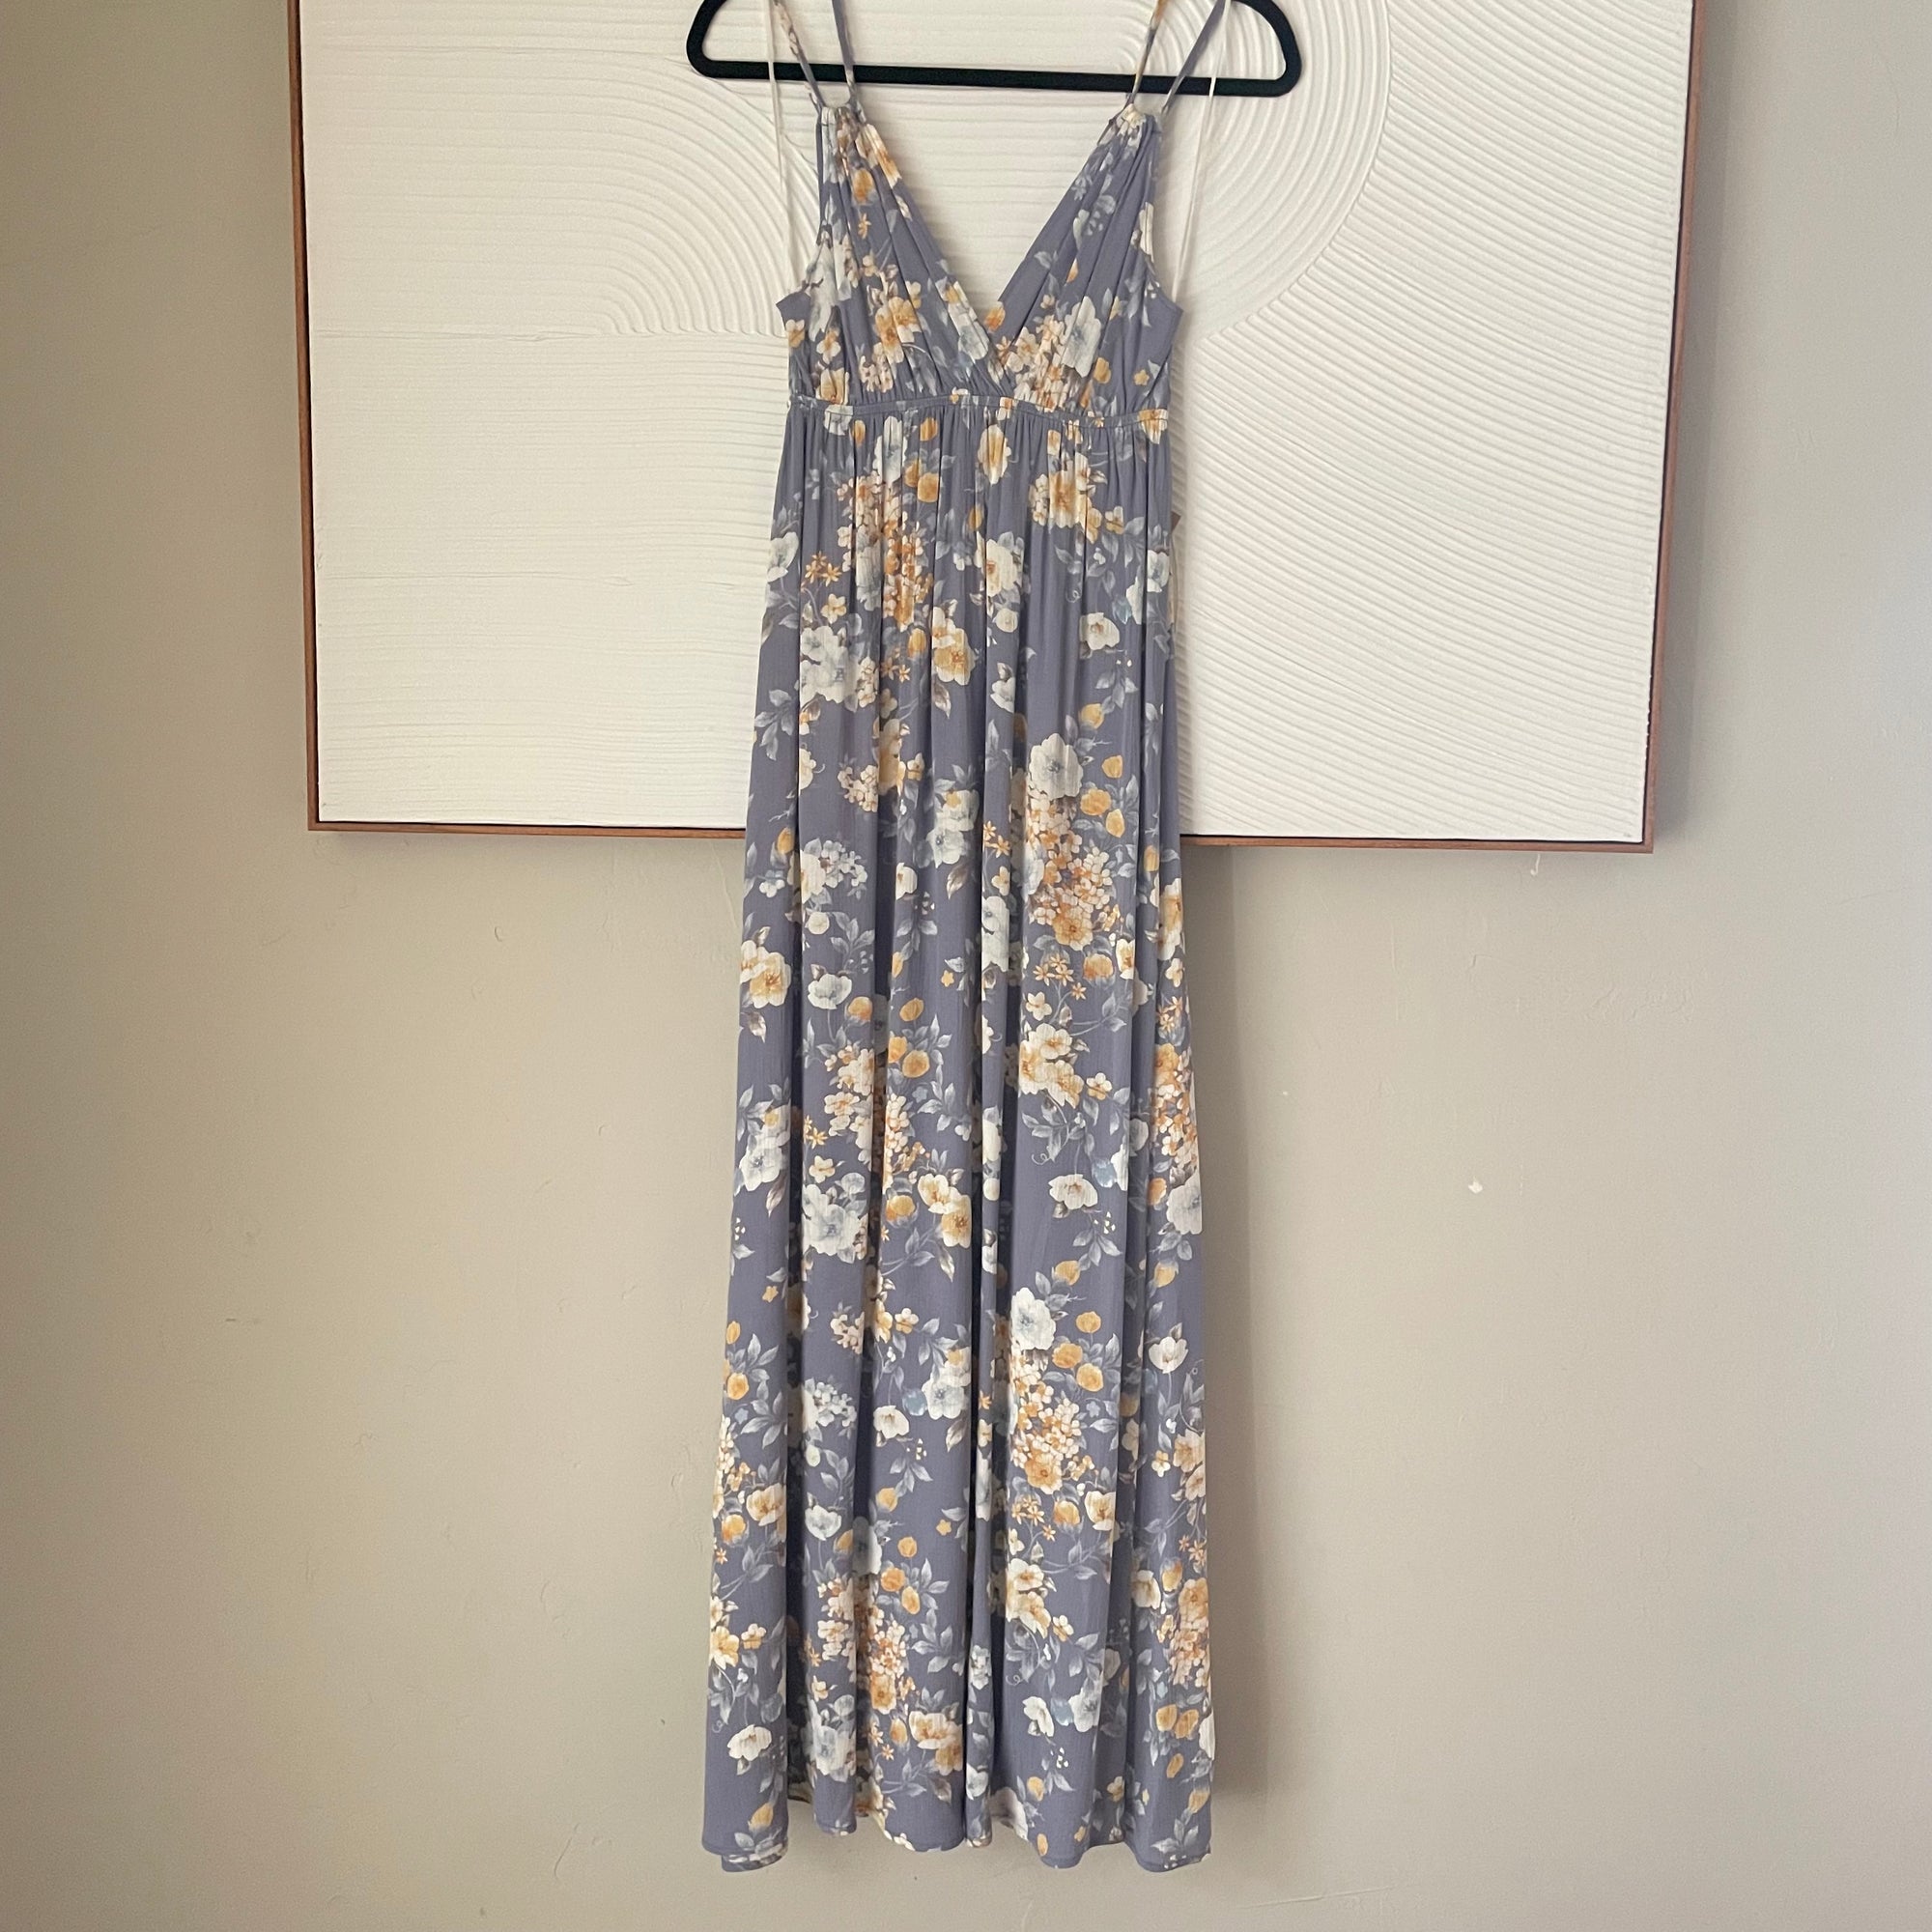 Periwinkle & Yellow Floral Maxi Dress